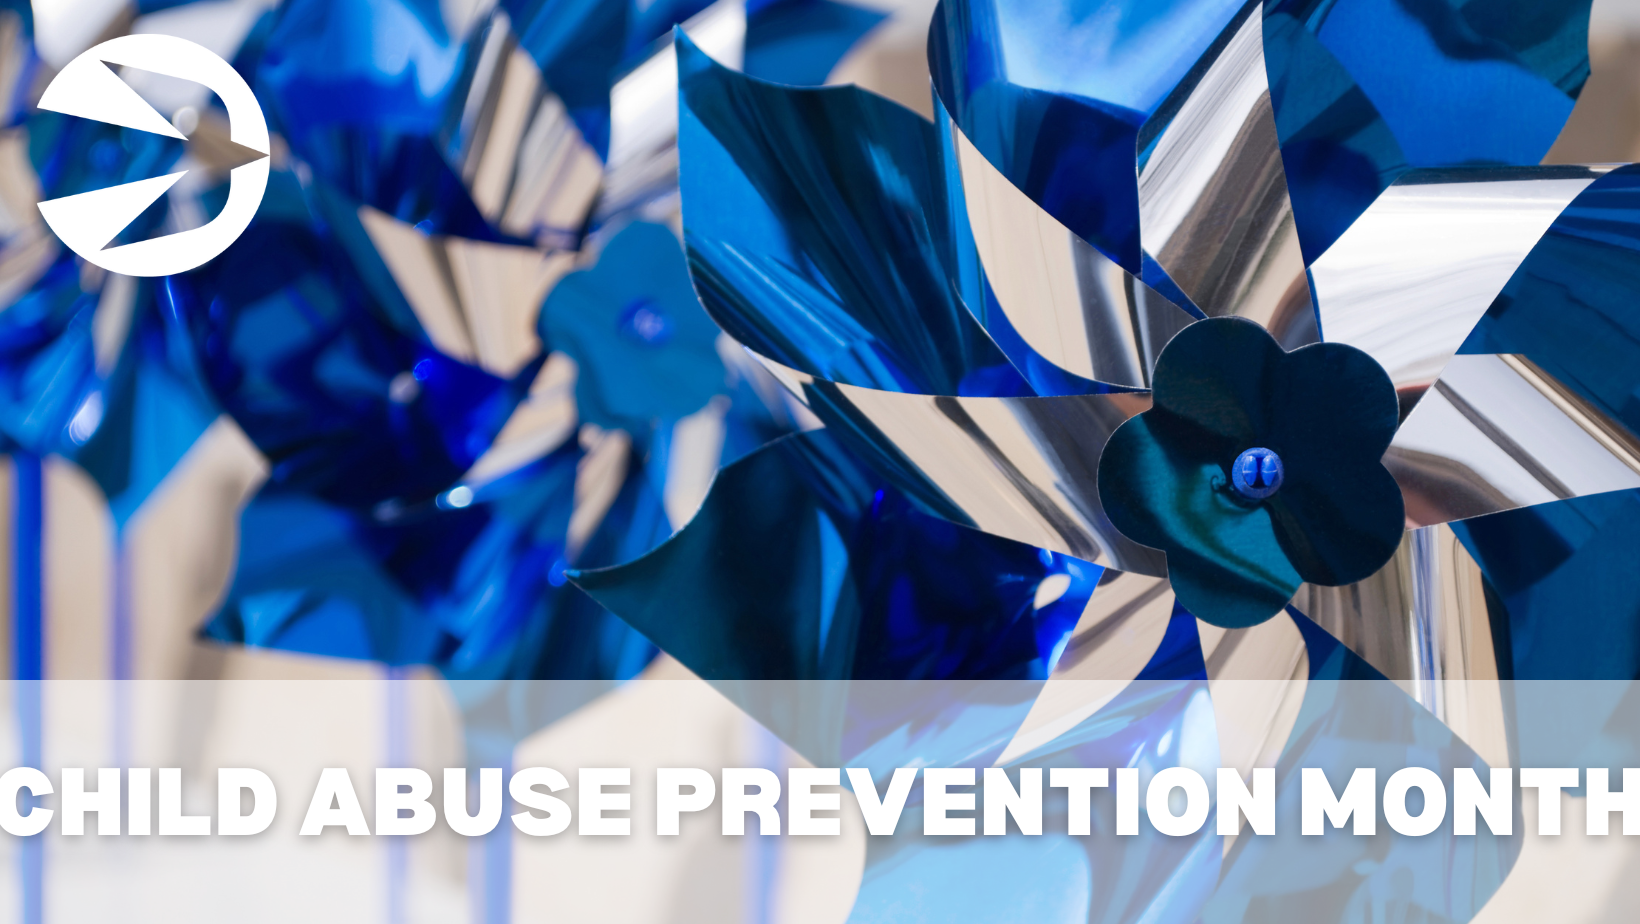 A close-up of blue and silver pinwheels with the text "CHILD ABUSE PREVENTION MONTH" at the bottom. A logo with a white arrow inside a blue circle is at the top left corner. The background is slightly blurred, highlighting the vibrant pinwheels.